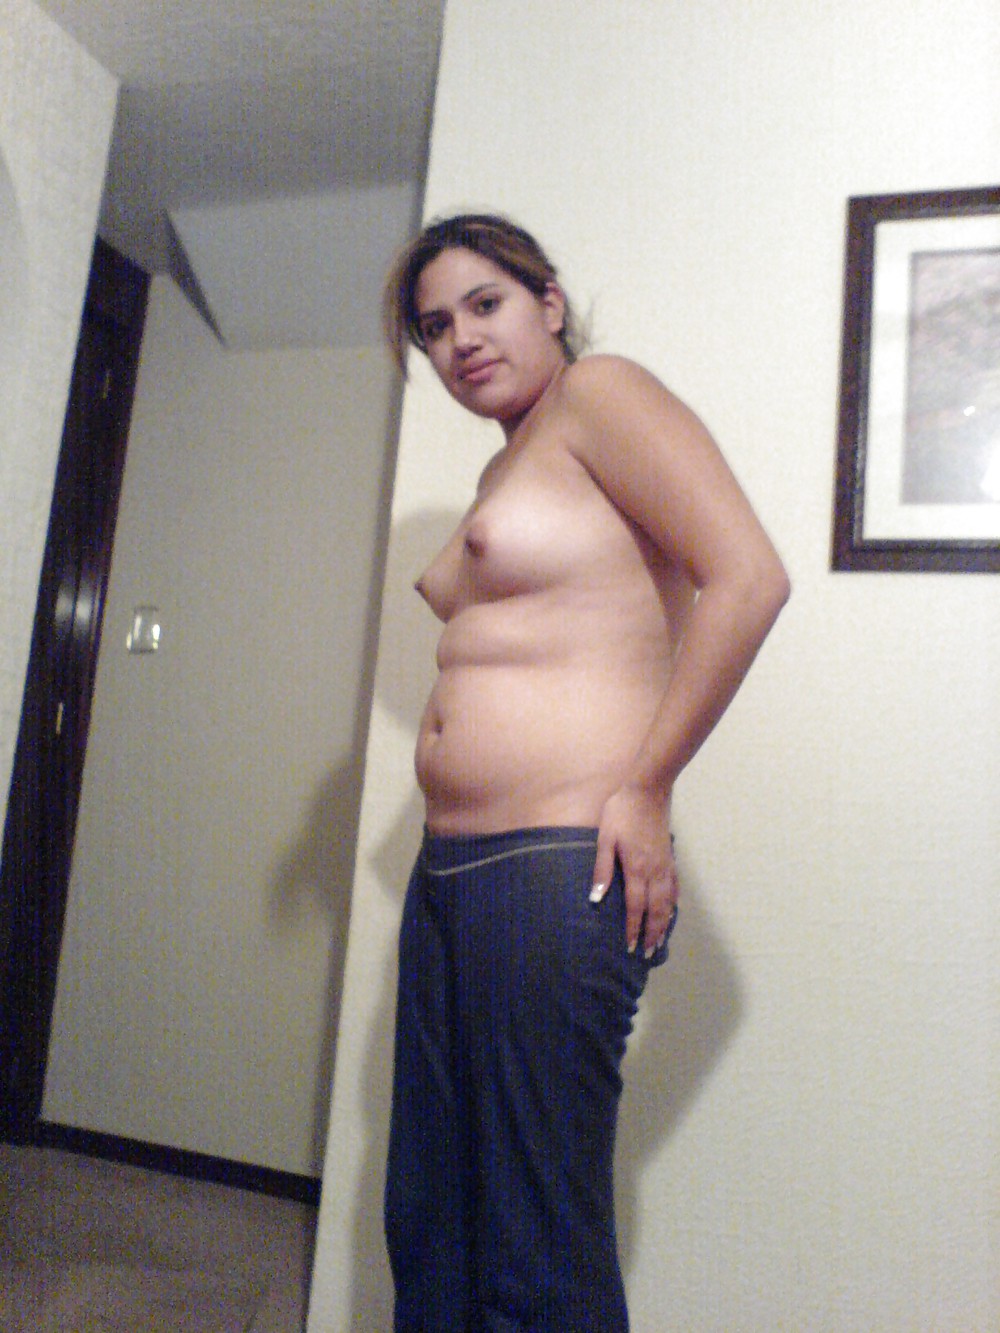 Some of my old pics. I was younger, but still a big ass bbw! adult photos